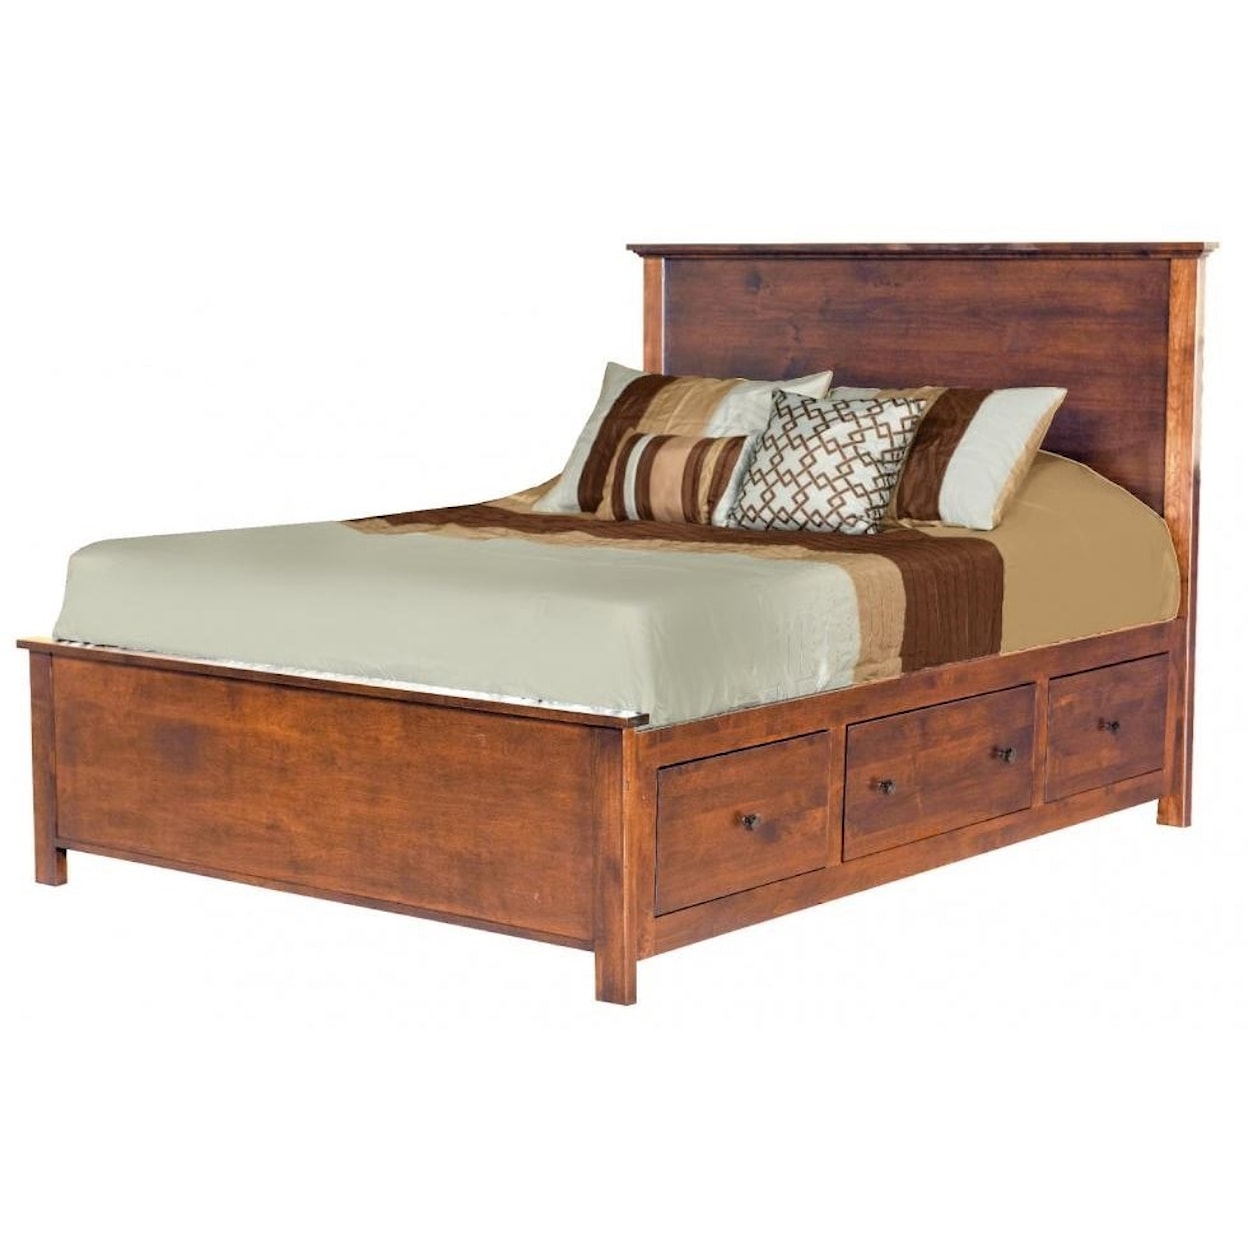 Archbold Furniture DO NOT USE - Shaker Queen Elevated Storage Bed